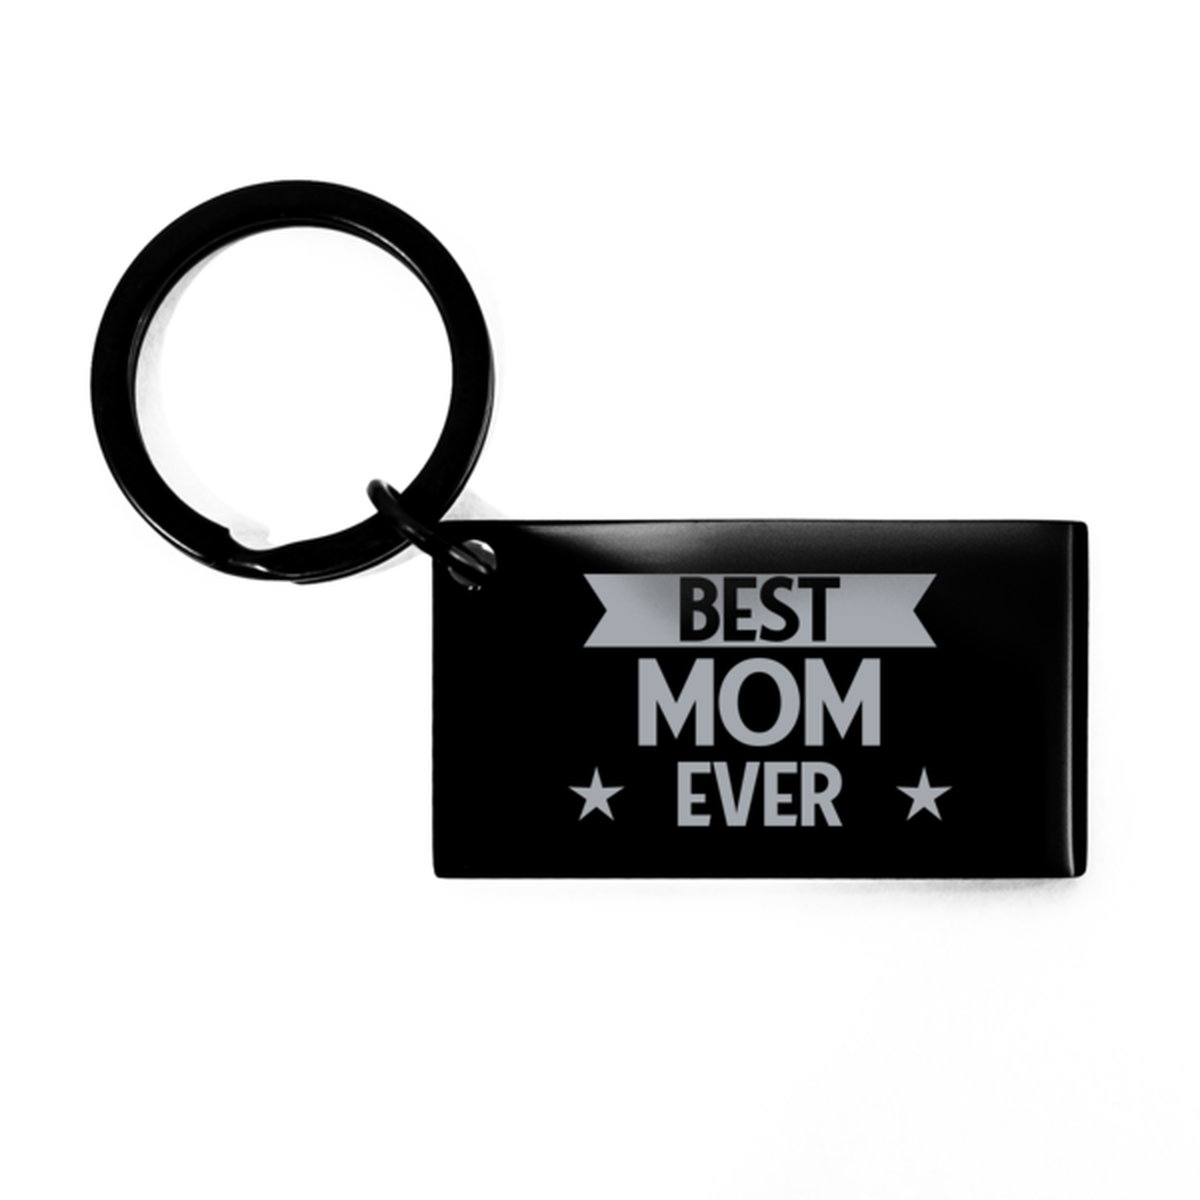 Best Mom Ever Mom Gifts, Funny Black Keychain For Mom, Birthday Engraved Keyring Presents For Women